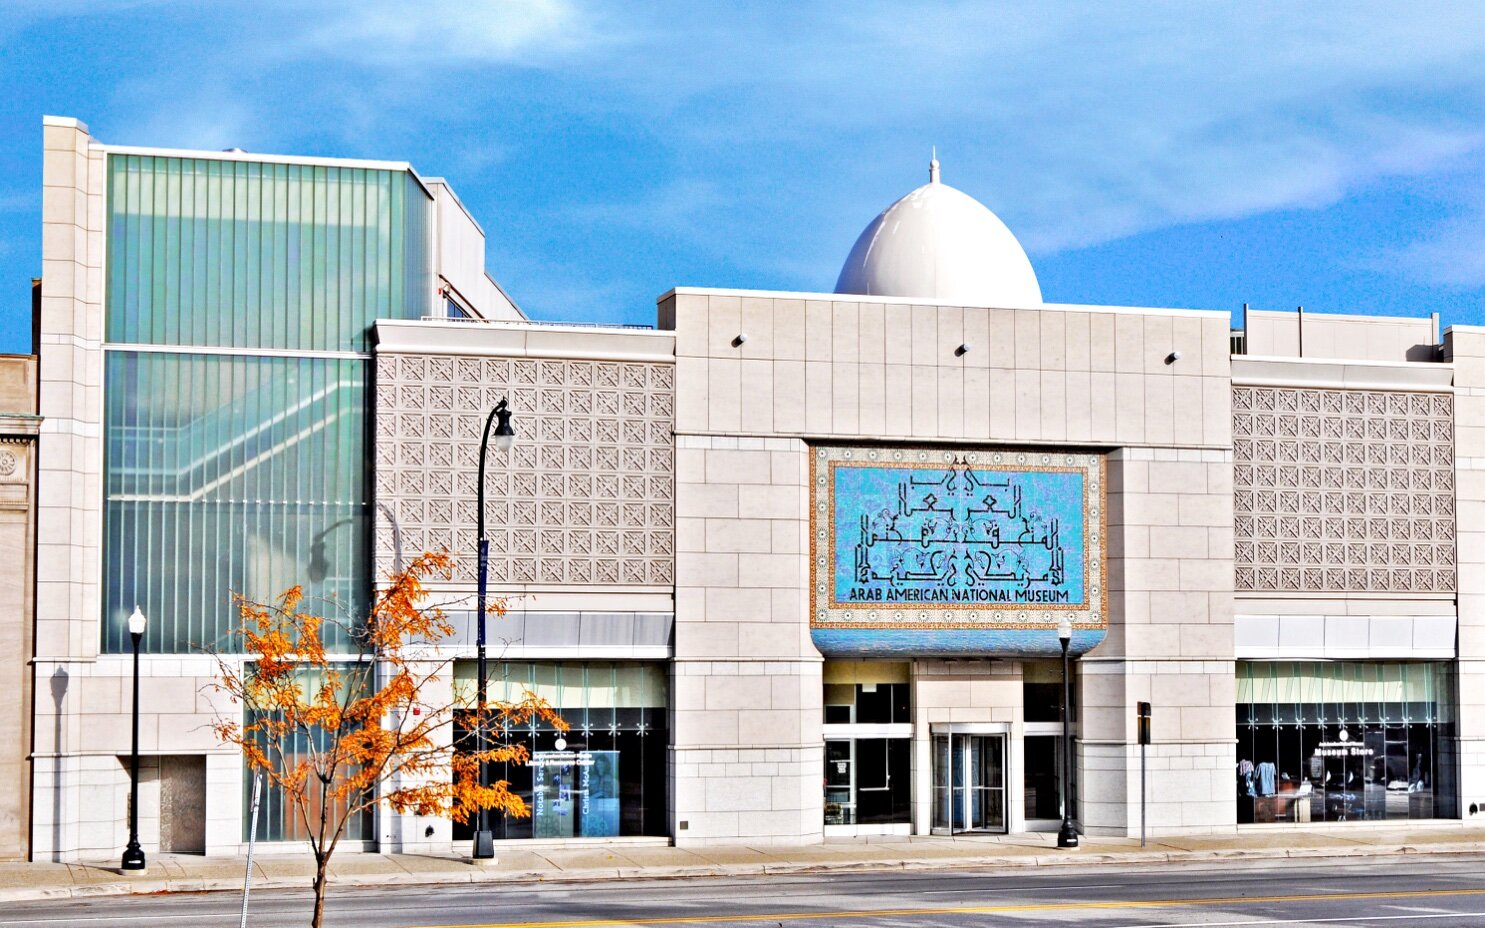 After two years of being closed to the public, the Arab American National Museum is set to re-open its doors.